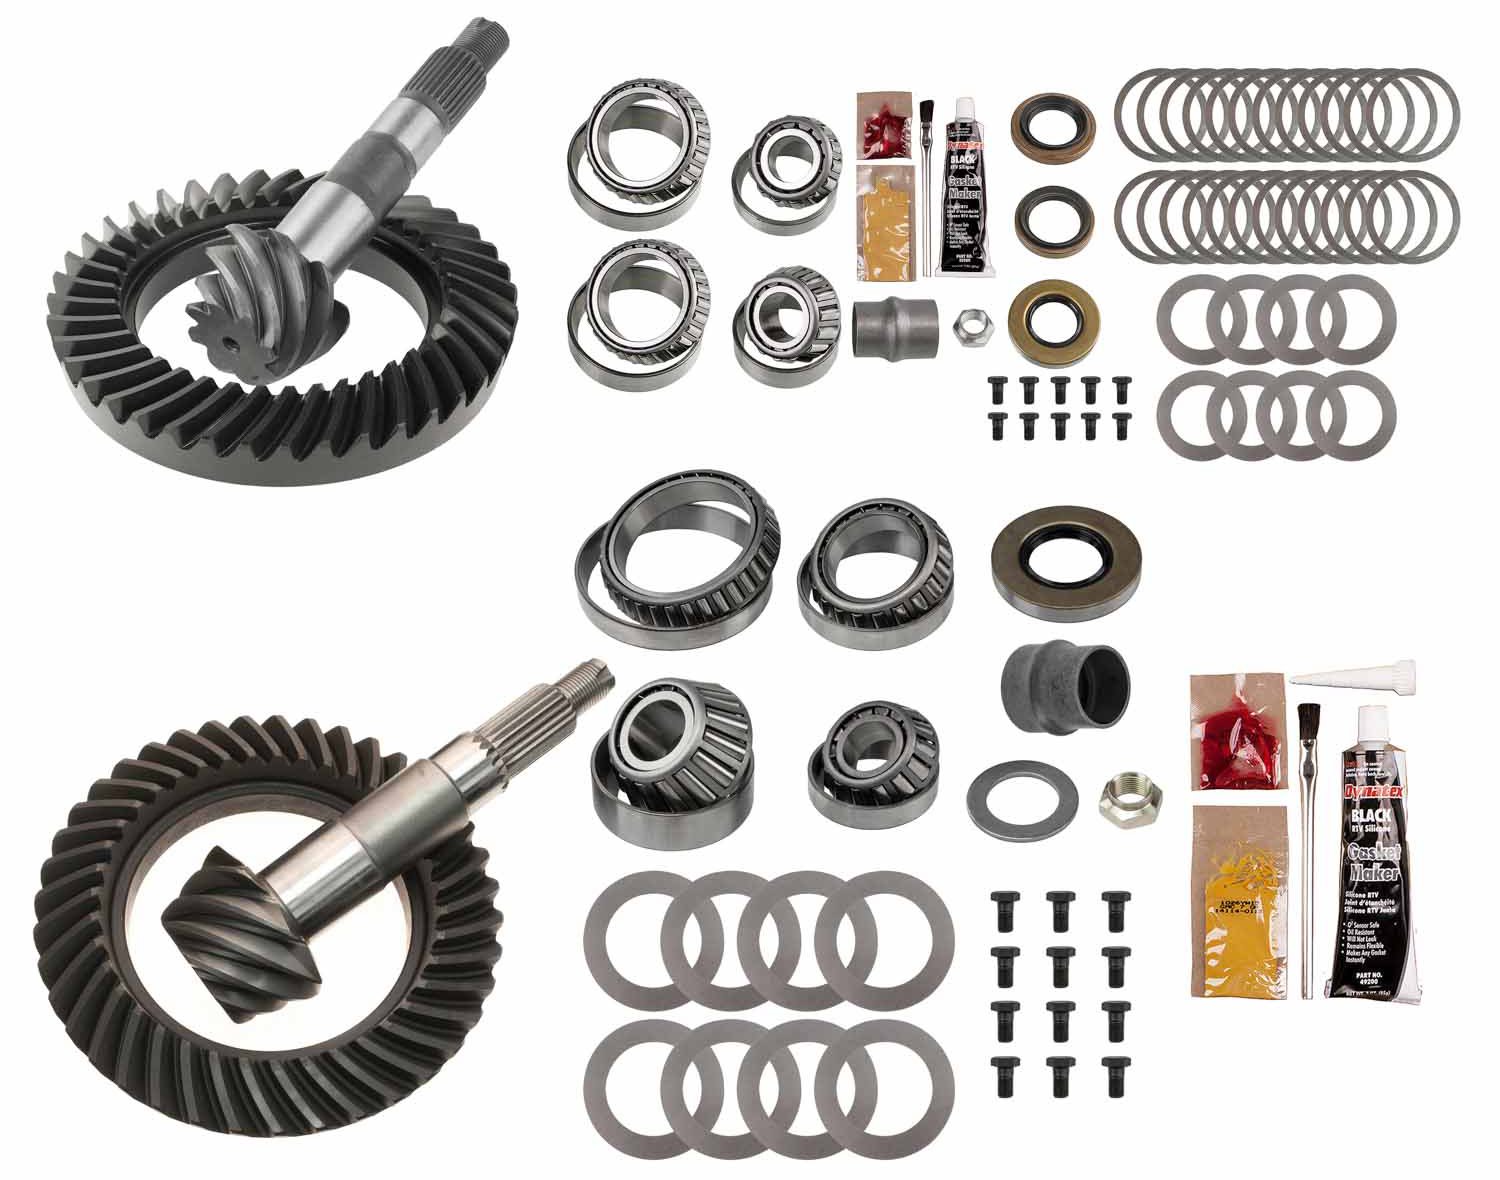 Complete Front and Rear Ring and Pinion Kit 2002-2004 Toyota Tacoma - 5.29 Ratio